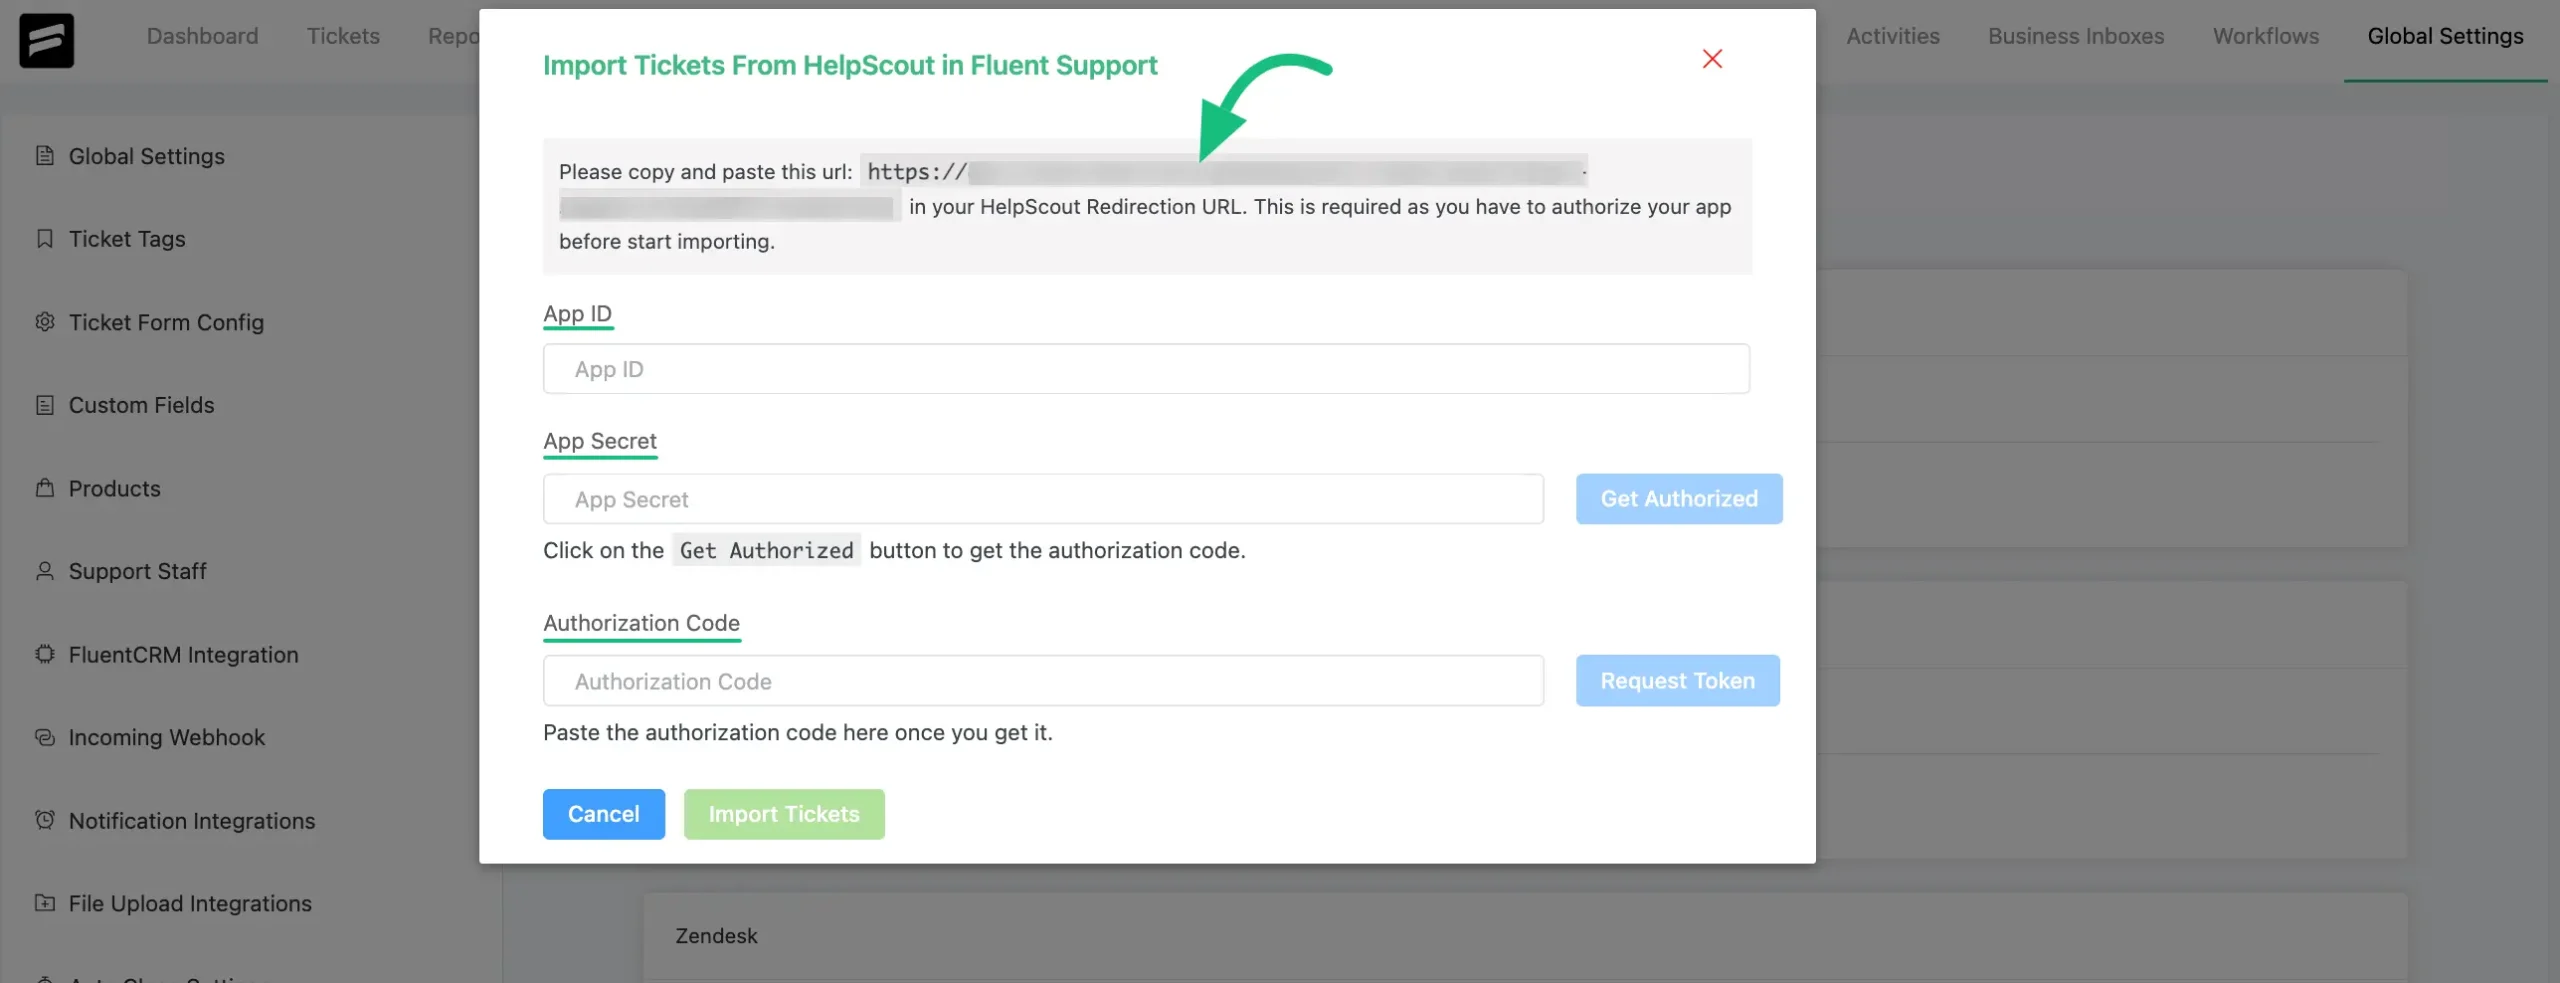 HelpScout Redirection URL